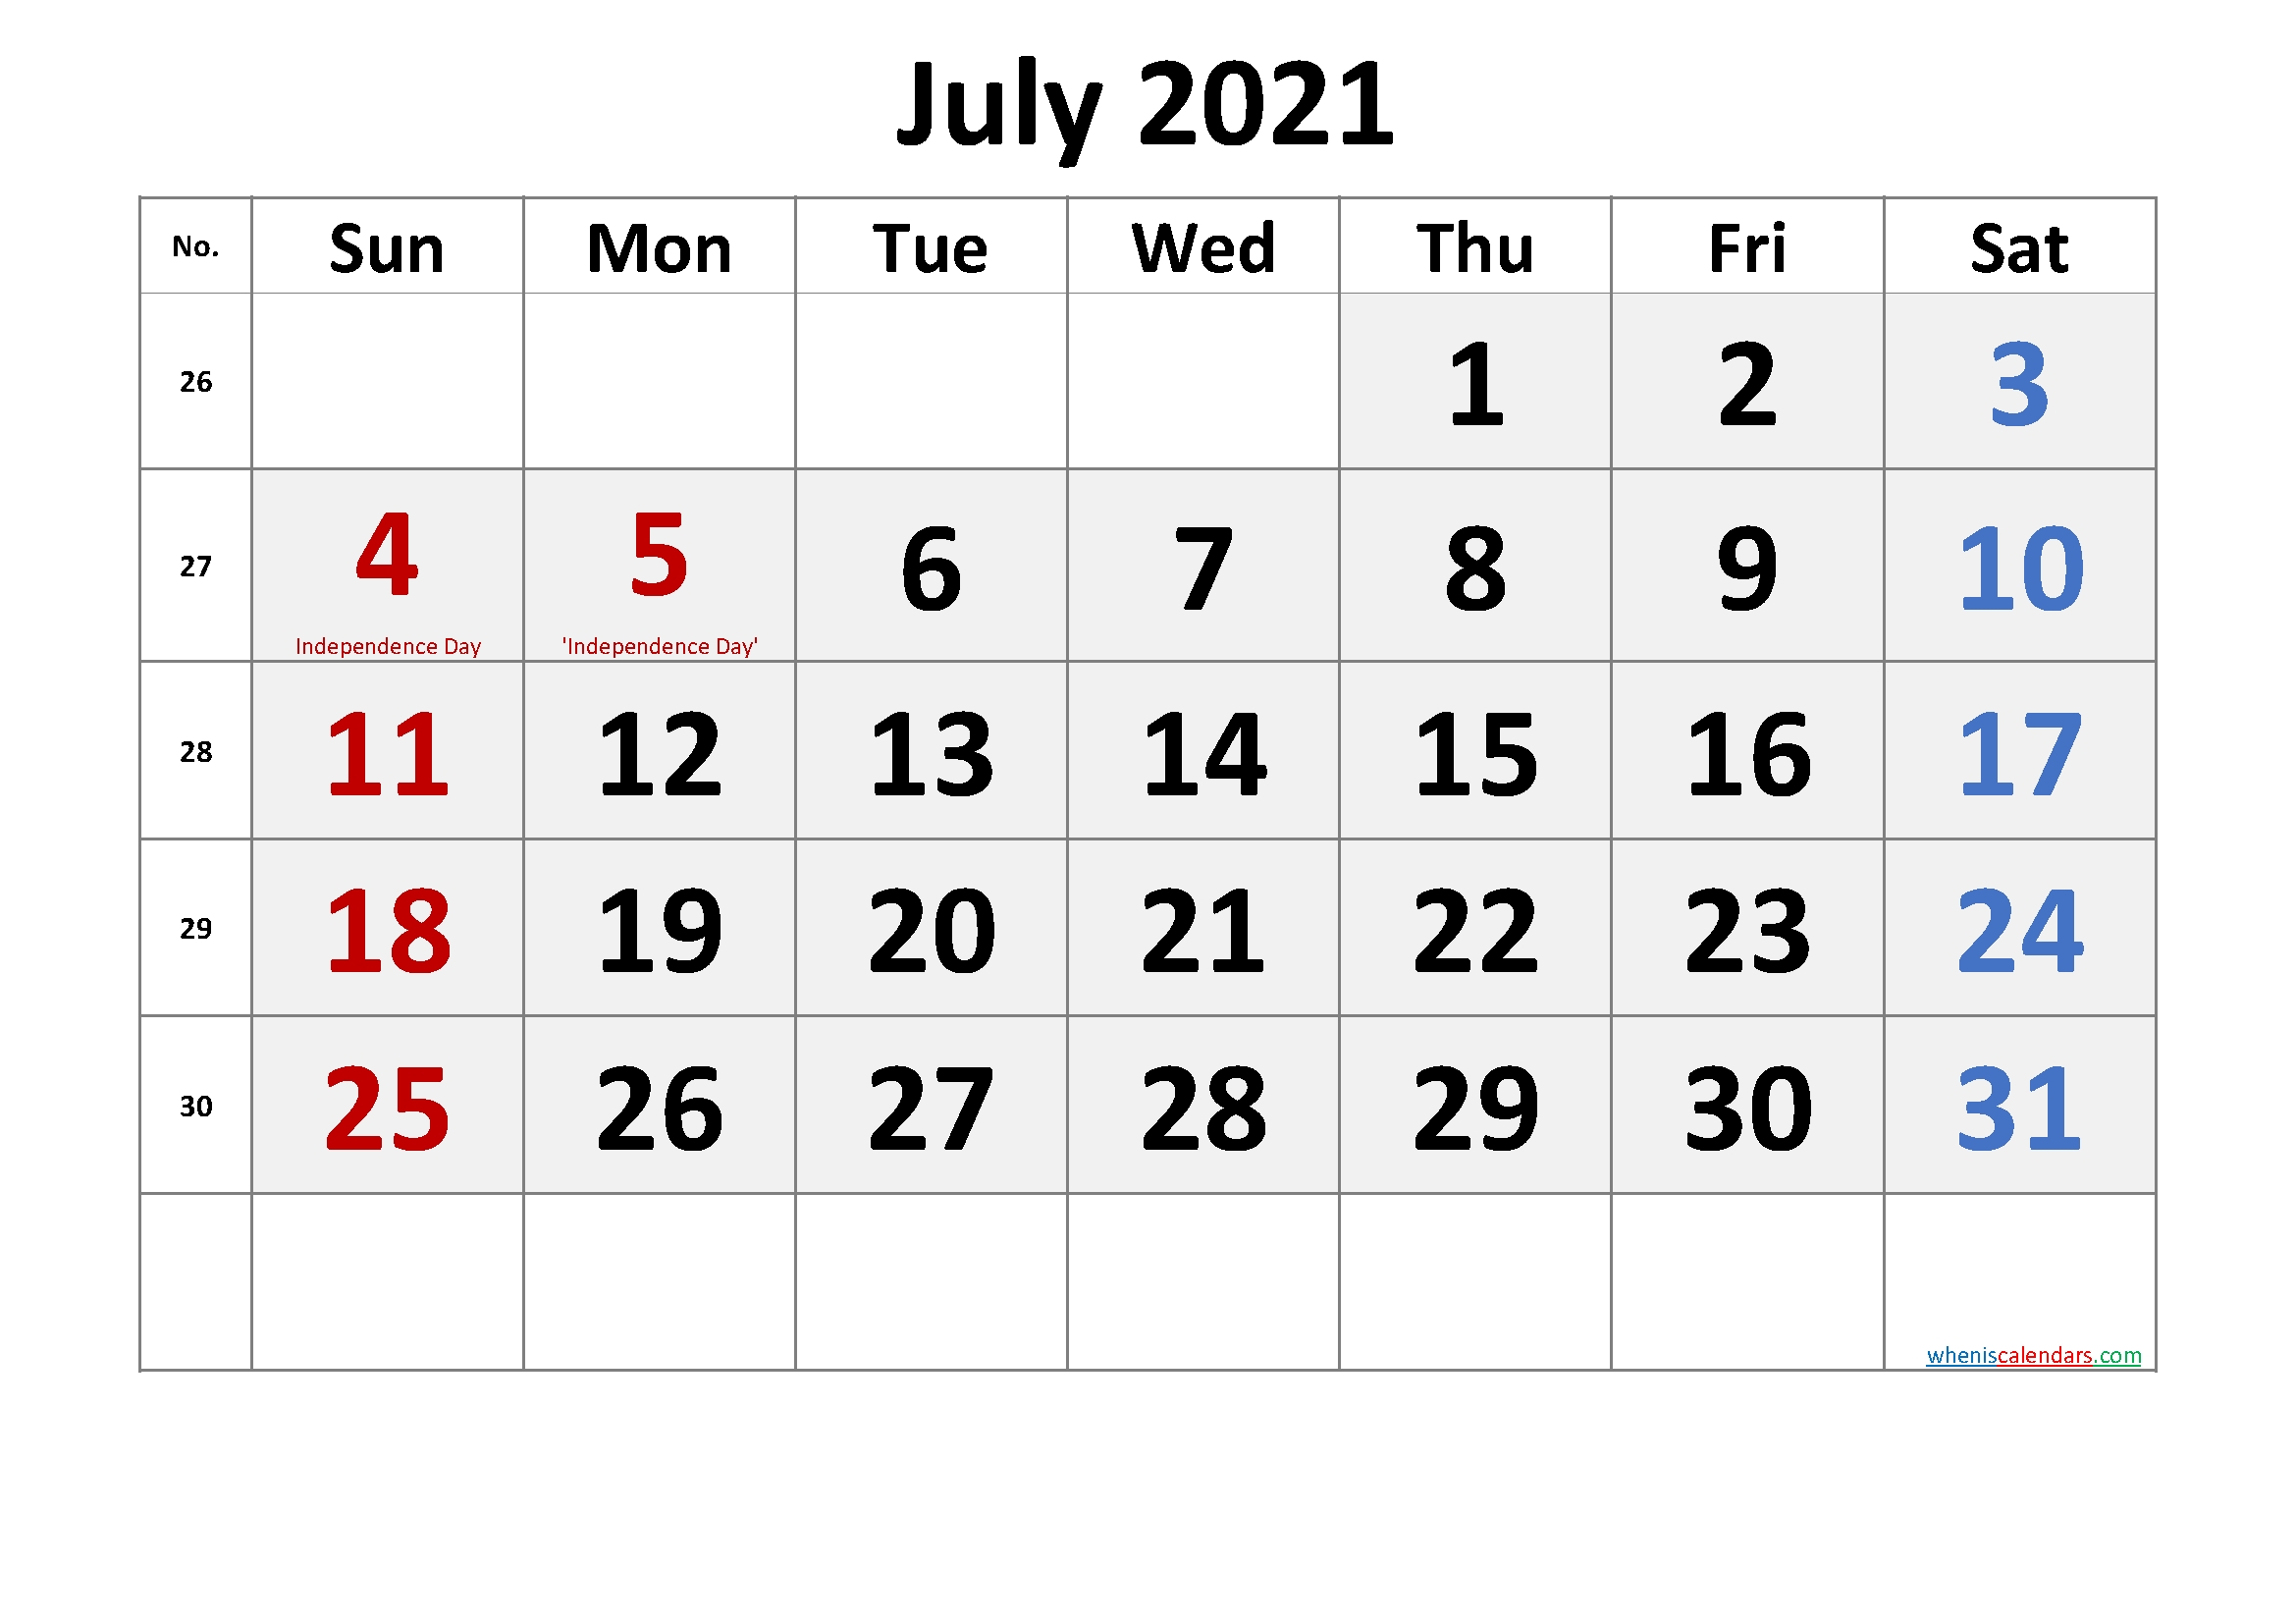 July 2021 Calendar With Holidays Printable-Template No.cr21M55 July 2021 Calendar Template